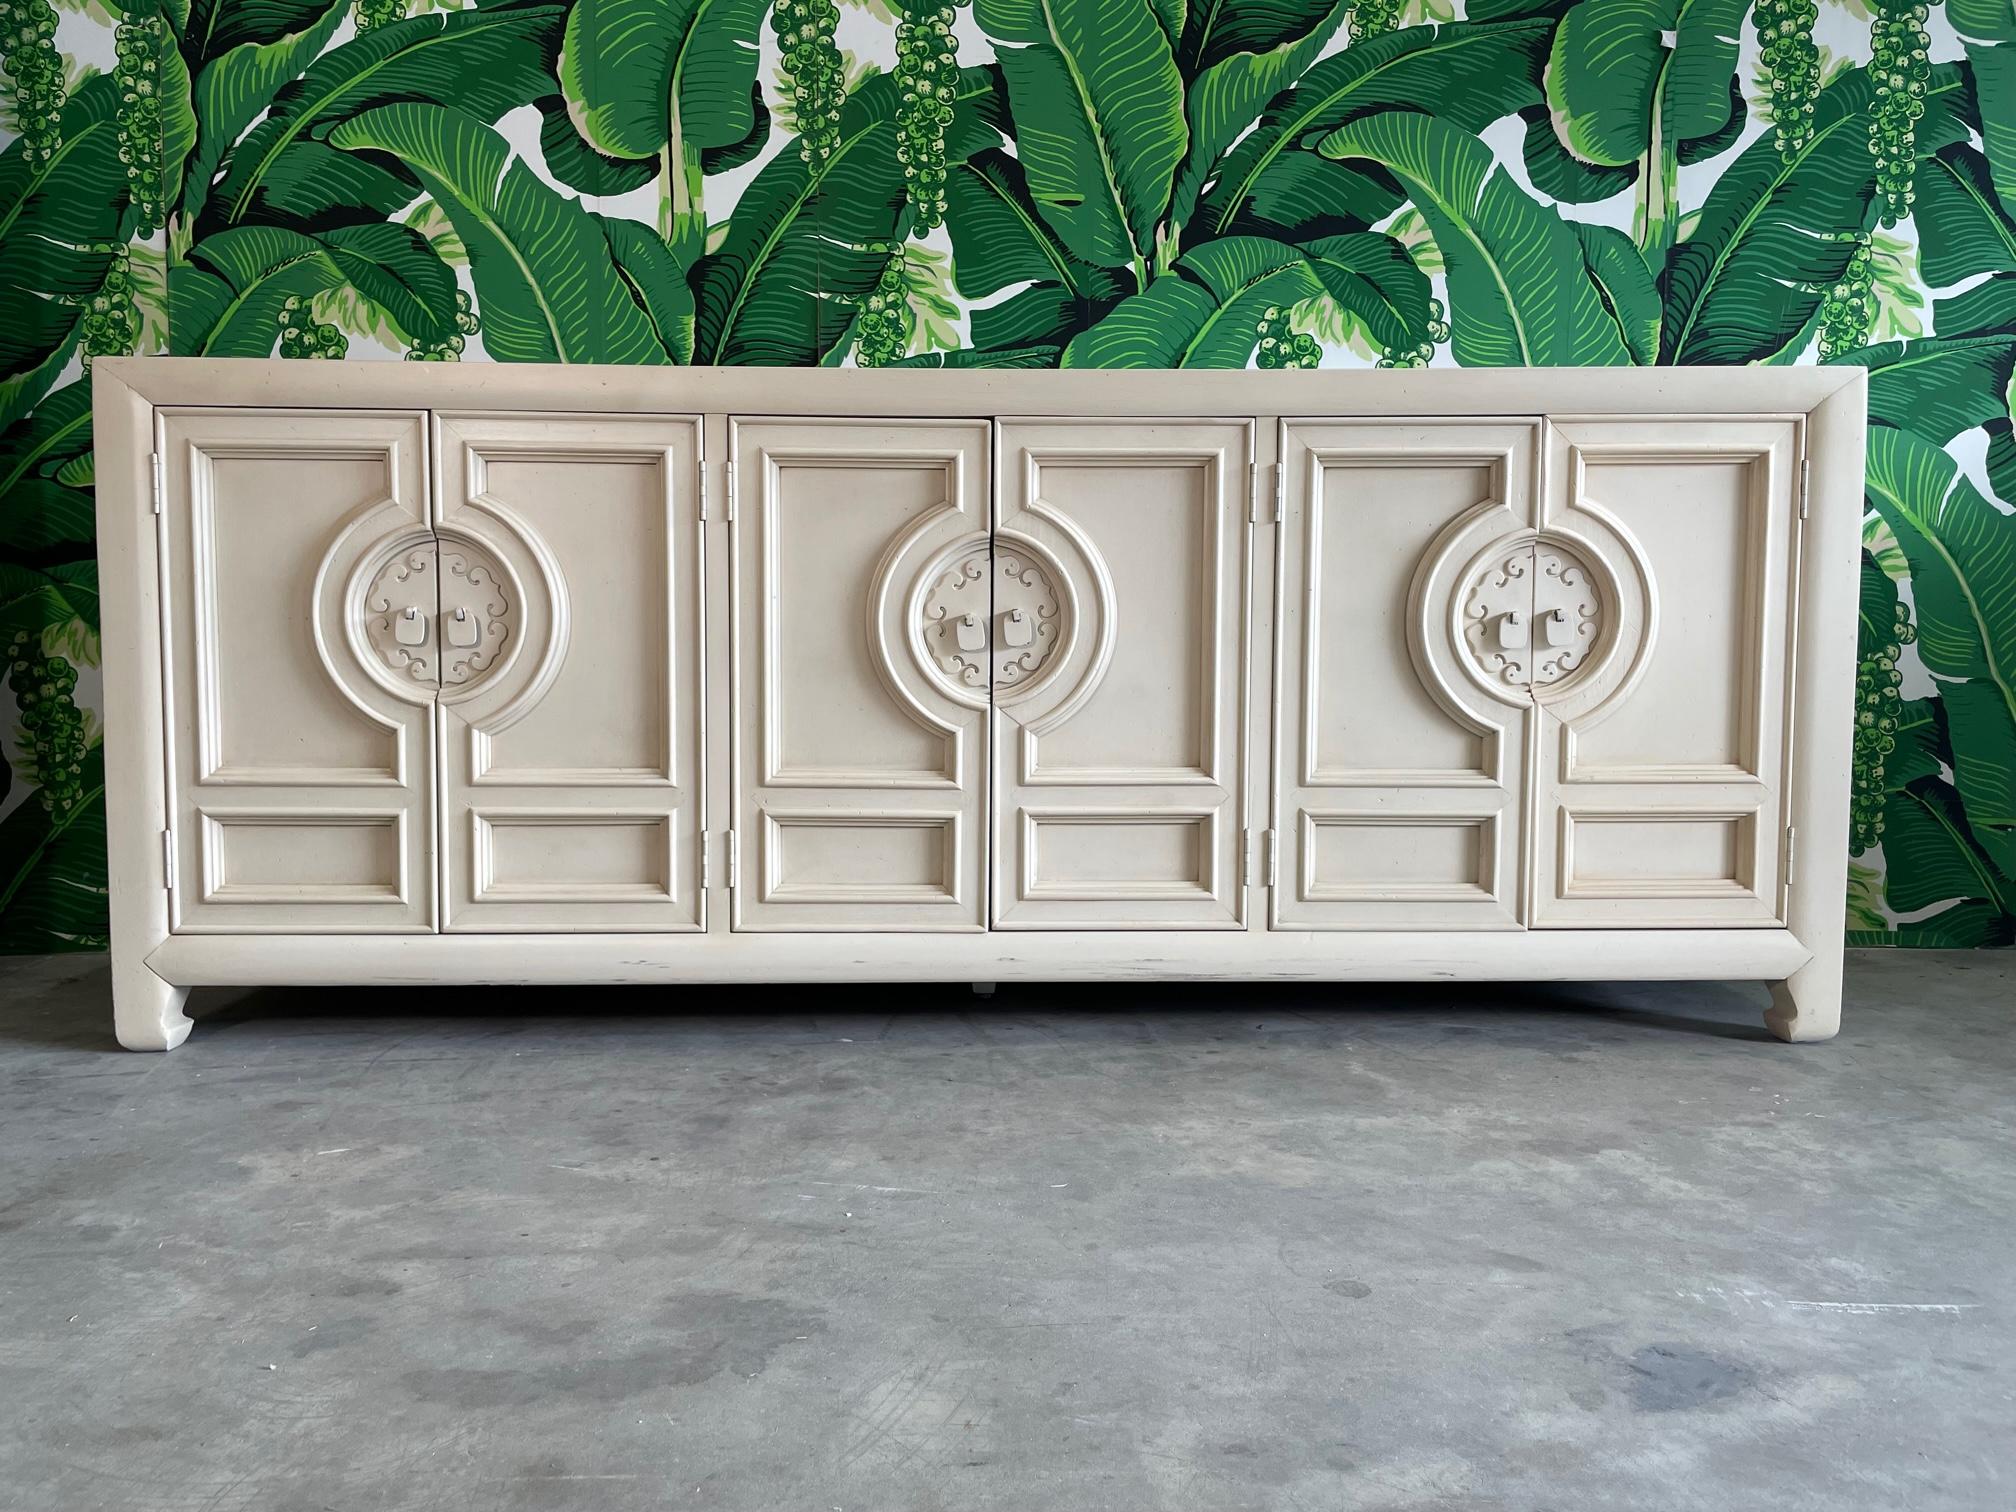 Heavy credenza by Century Furniture features Asian style hardware and Ming Feet. Has been painted by previous owner. Good condition with imperfections consistent with age. May exhibit scuffs, marks, or wear, see photos for details.

 